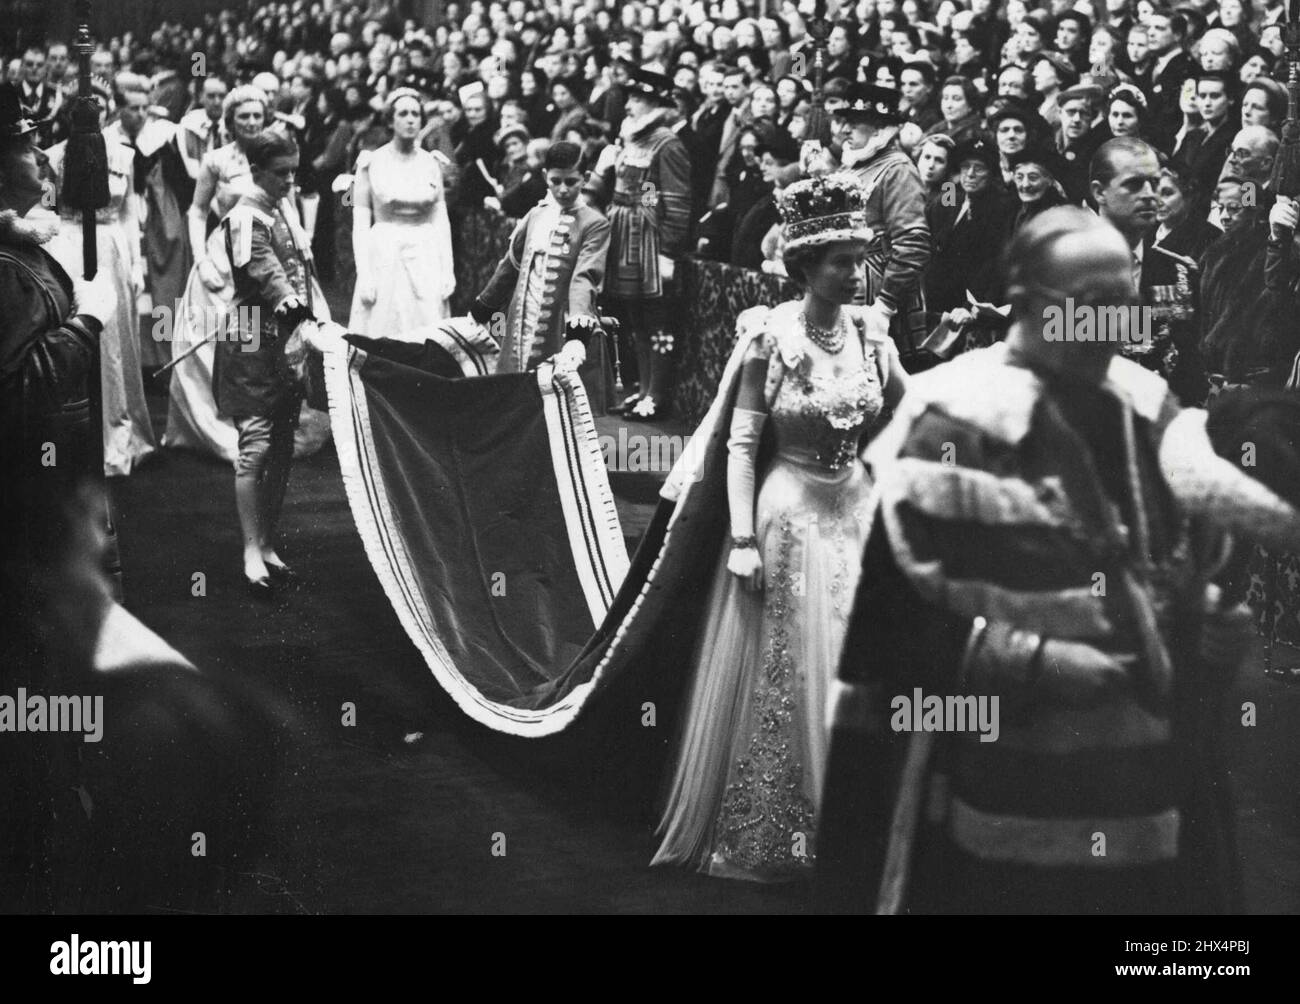 State Opening Of Parliament.The magnificent scene of pageantry as Her Majesty The Queen in her Robes and wearing the Imperial Crown, leaves the Robing Room and walks in procession through the Royal Gallery to the Chamber of the House of Lords to perform the State Opening of Parliament. Her Majesty is accompanied by H.R.H. The Duke of Edinburgh and proceeding them (extreme right) is The Marquess of Salisbury bearing the Cap of Maintenance. Her Majesty's pages are the Hon. Anthony Tryon and Edward Adeane Esq. (This is the first occasion that it has been allowed to talks a photograph of a reignin Stock Photo